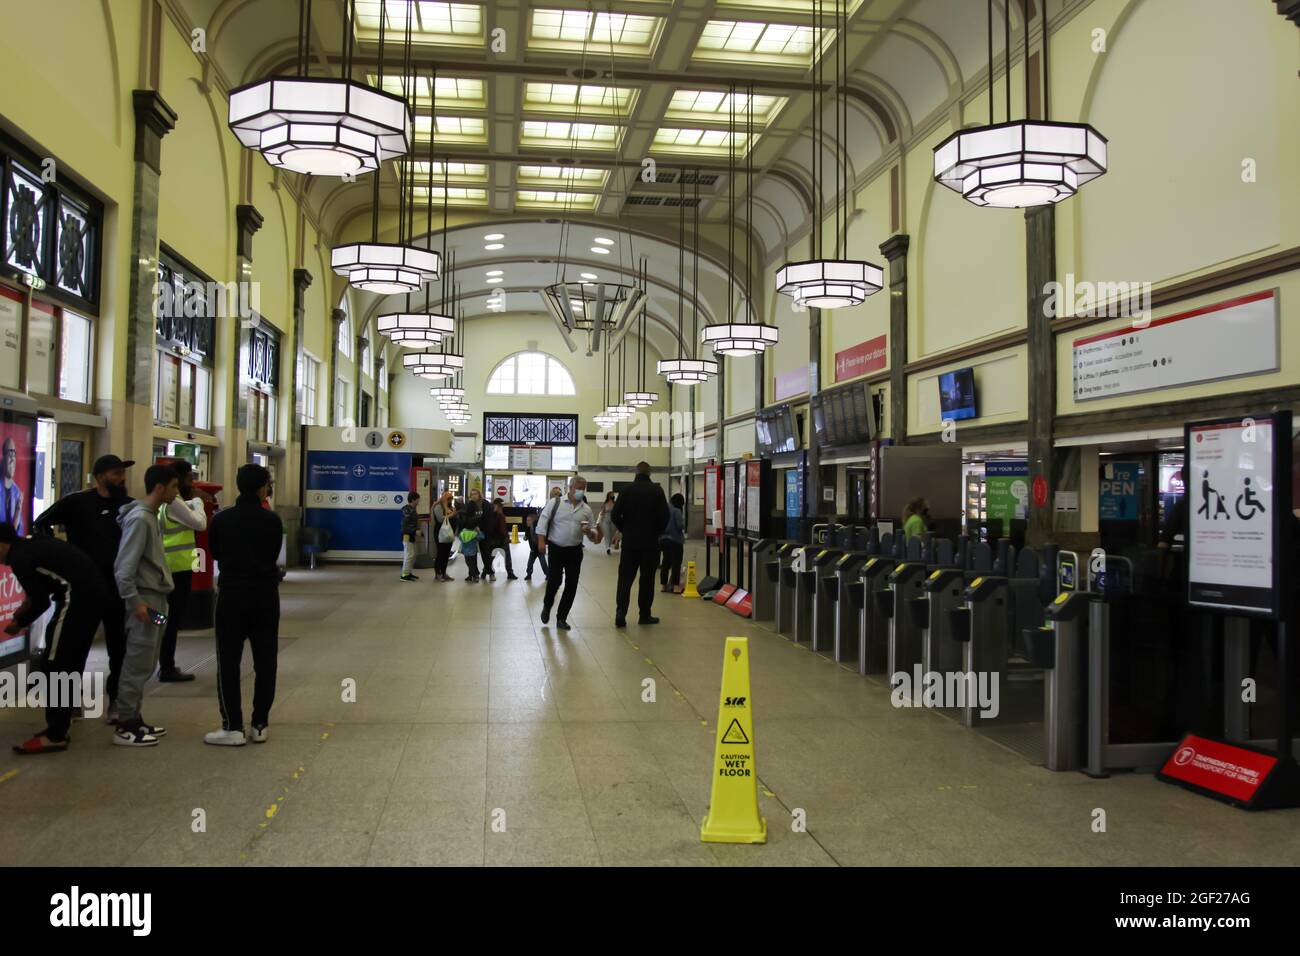 Entrance hall of Cardiff Central railway station, South Wales, UK, 2021 Stock Photo